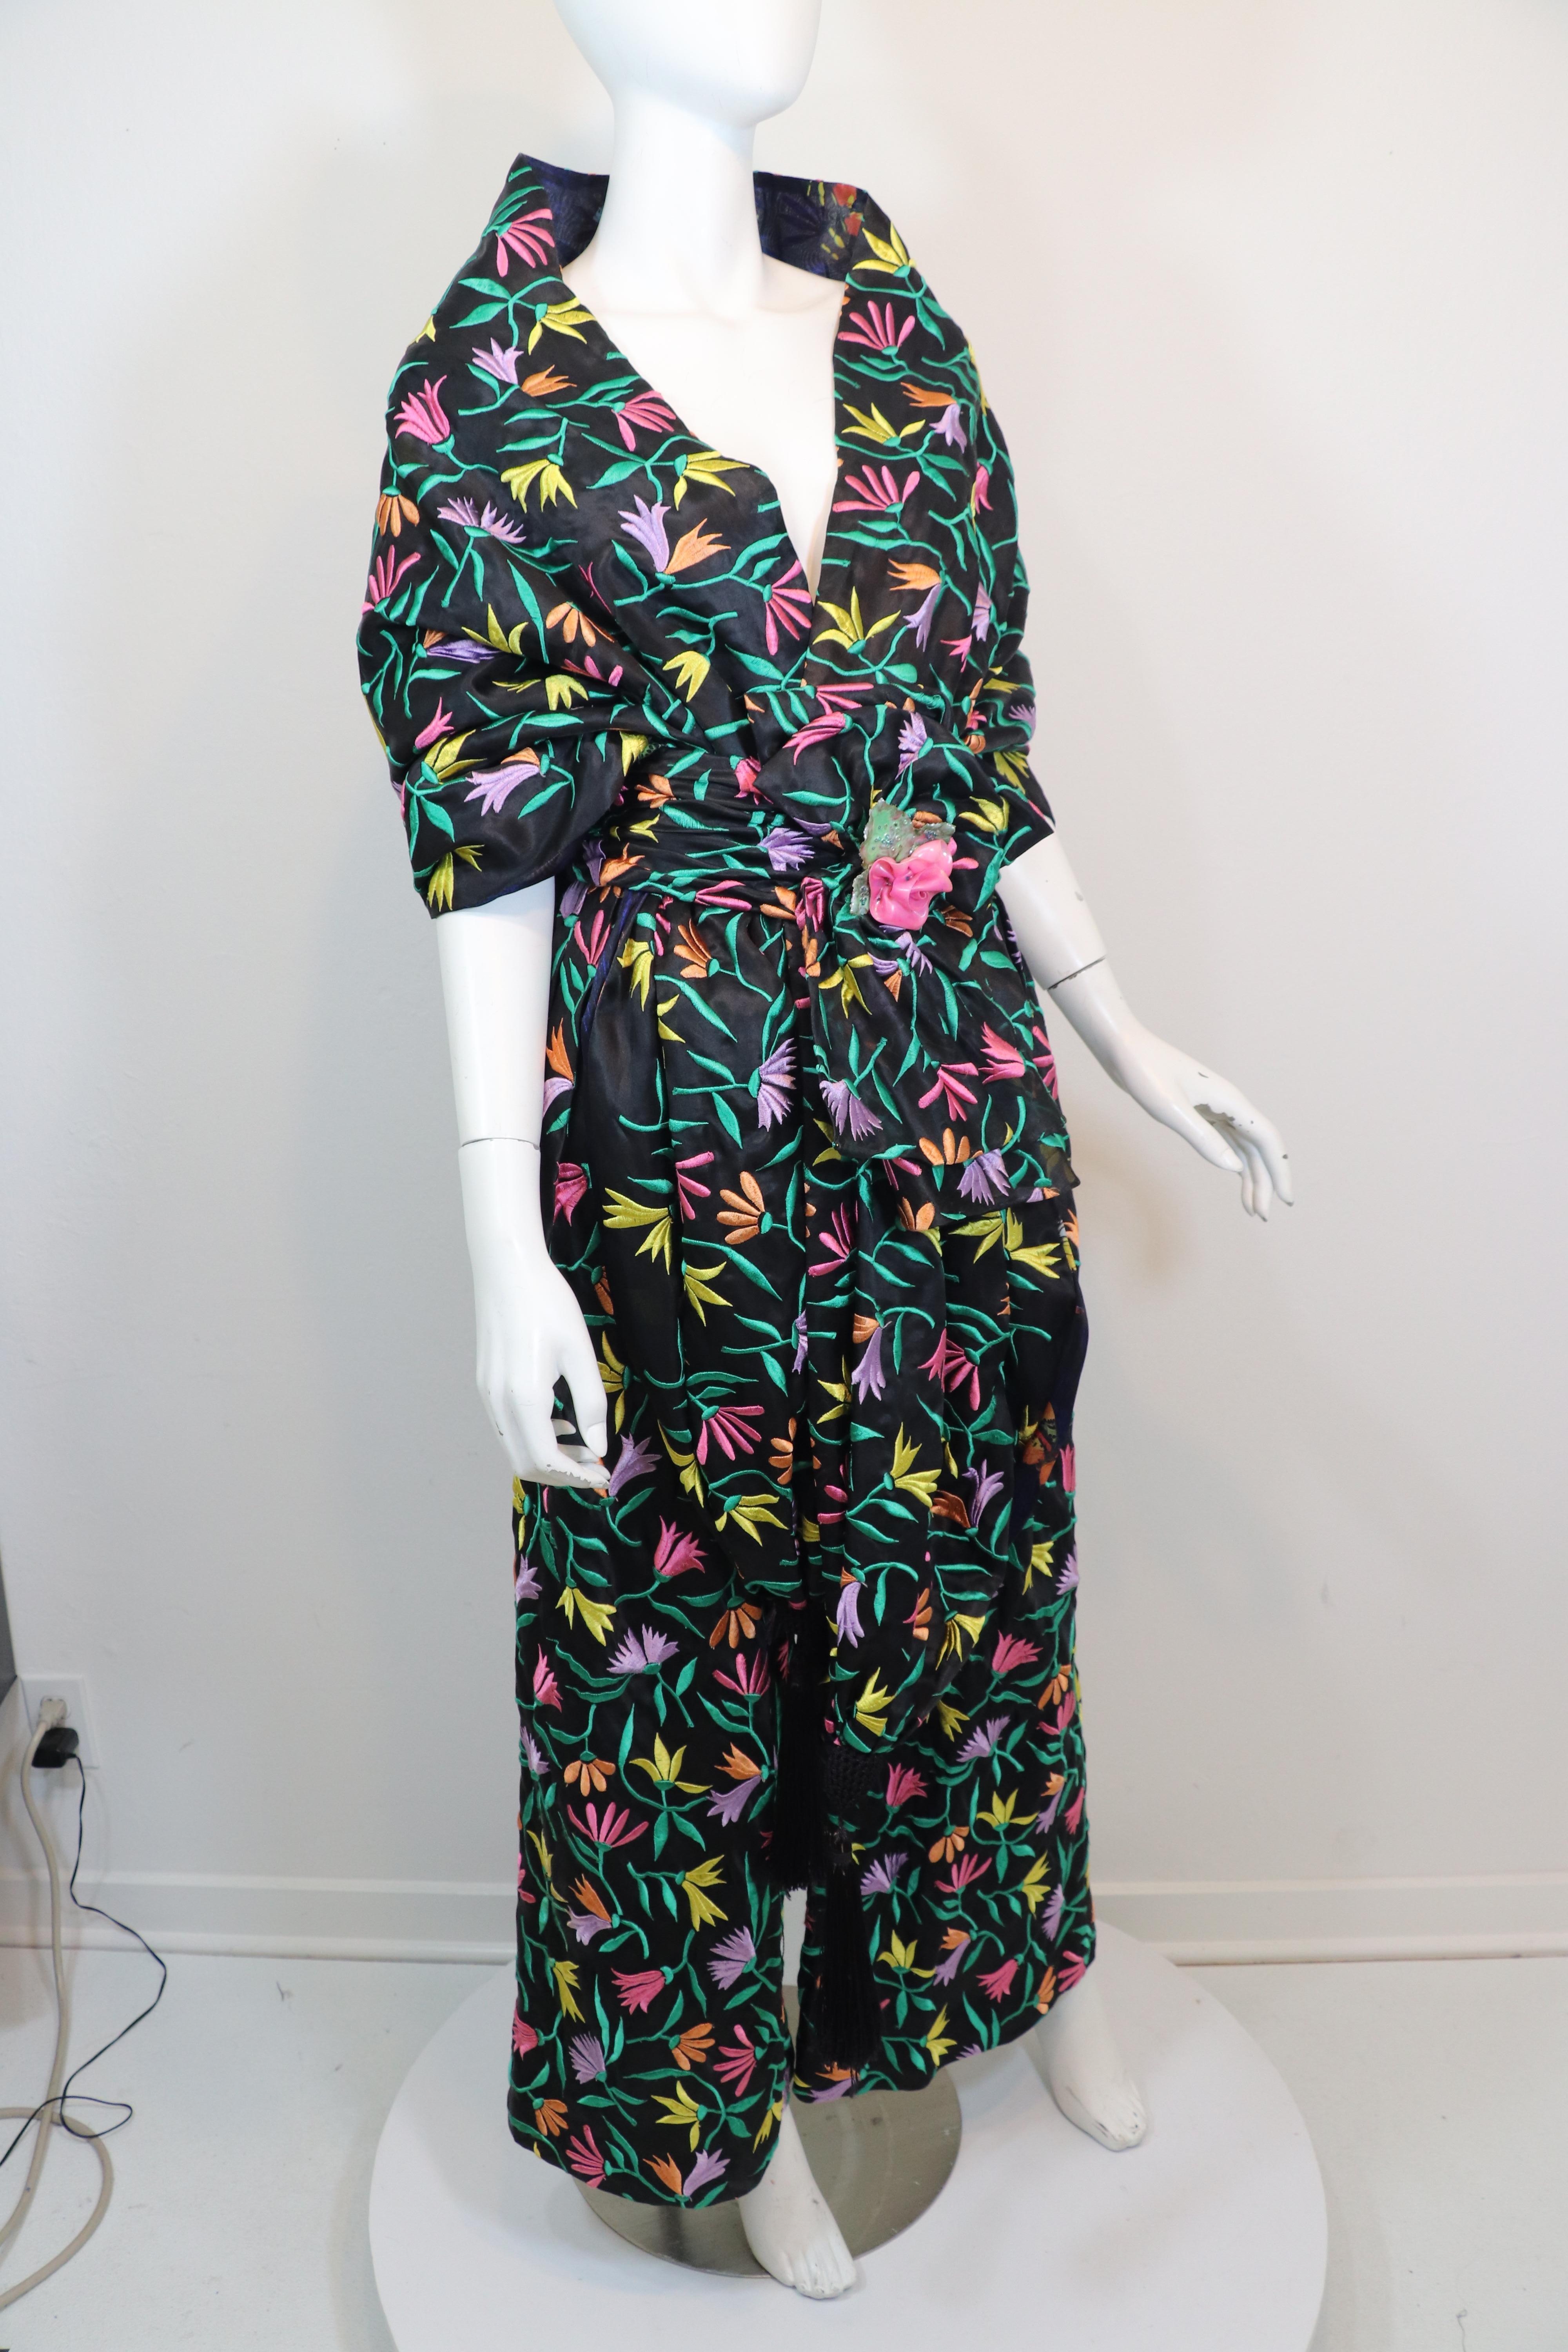 Chanel Haute Couture Lesage embroidered pants, shawl and belt ensemble. Black silk satin embroidered allover with pink, topaz, yellow, and lavender flowers with emerald green stems. Lined in black butterfly print silk organza. Black 9